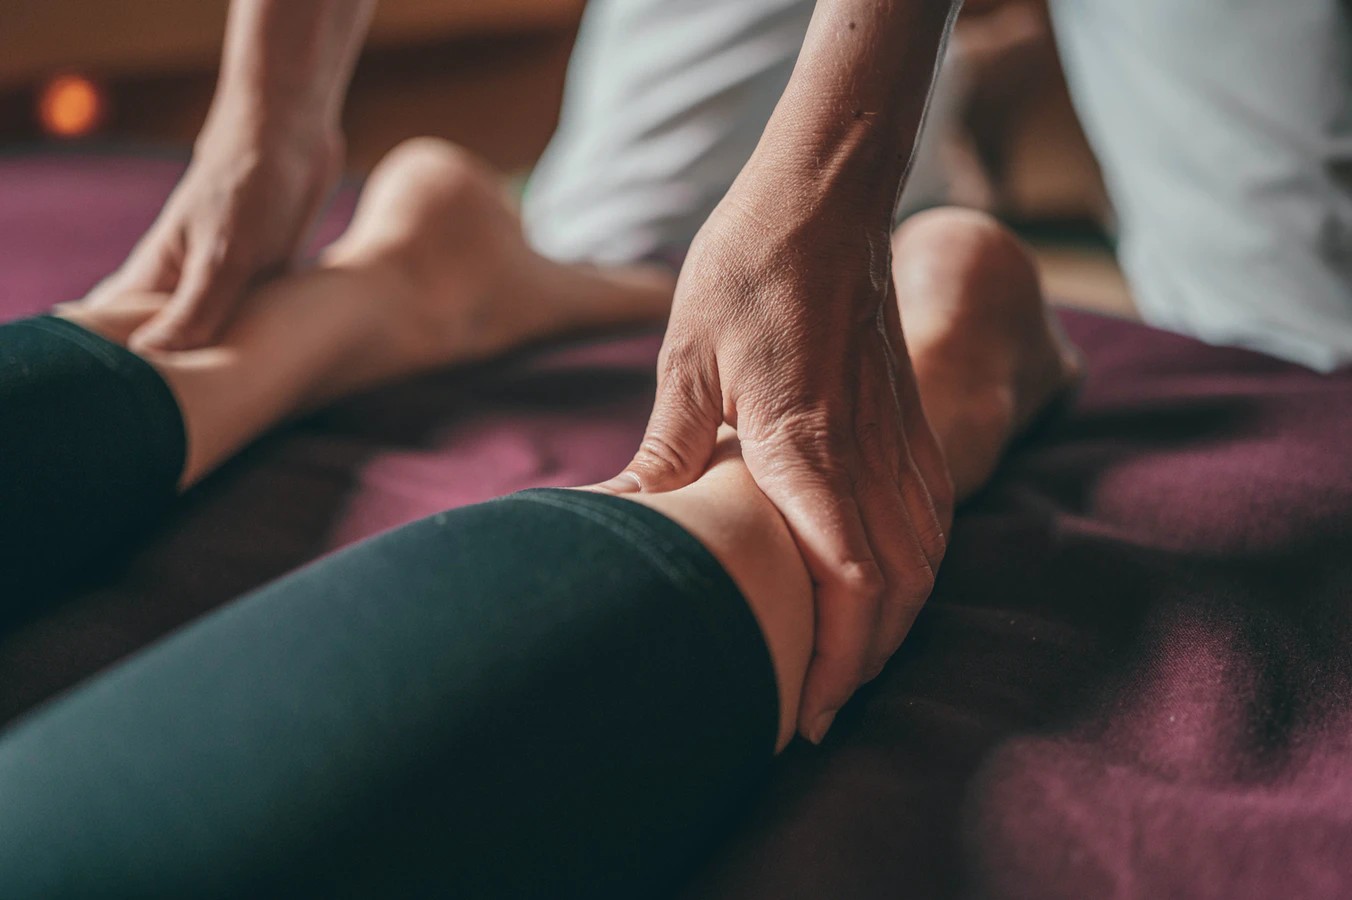 How To Relieve Leg Pain With Reiki?